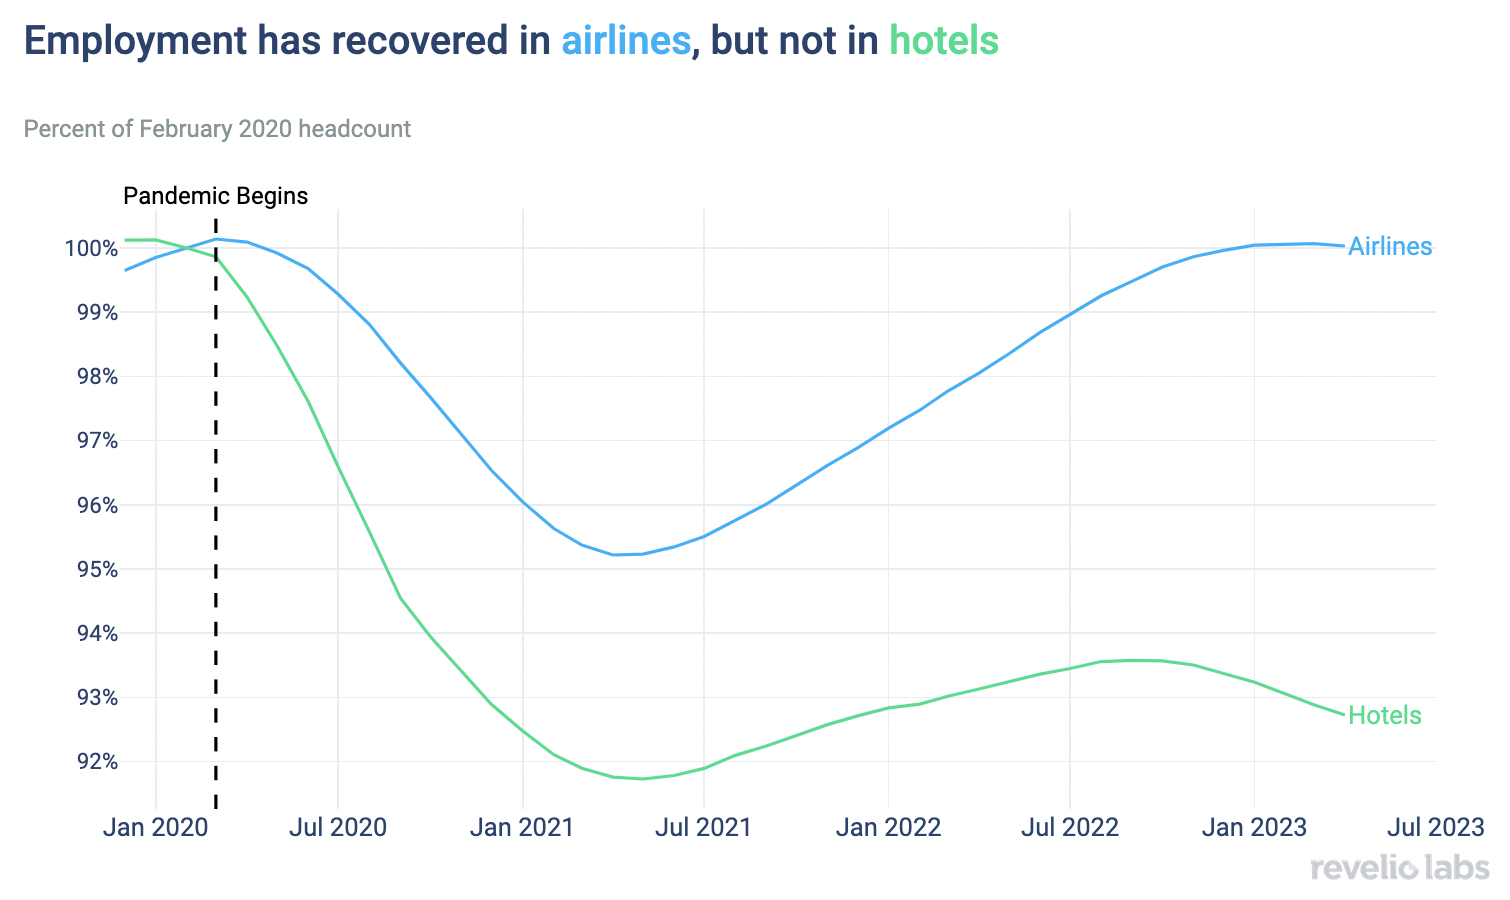 Employment has recovered in airlines, but not in hotels